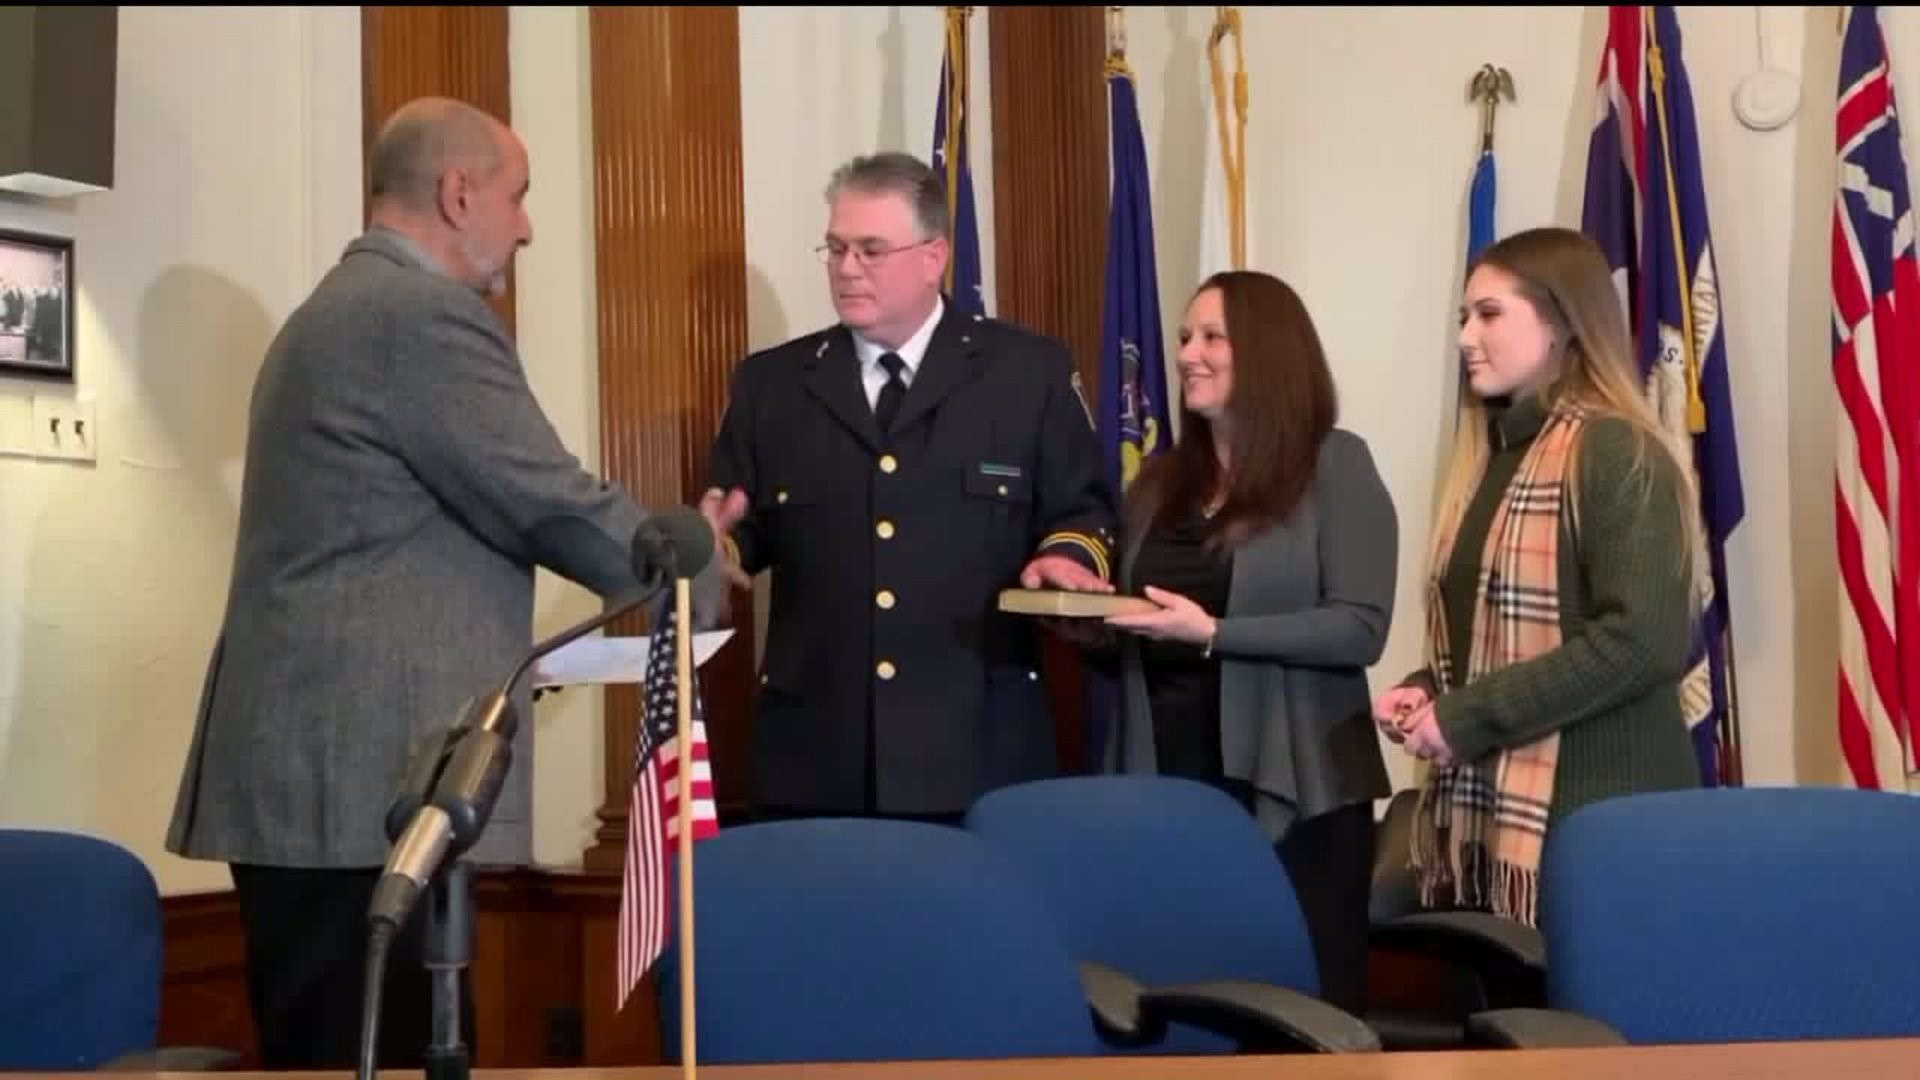 New Police Chief in Wilkes-Barre